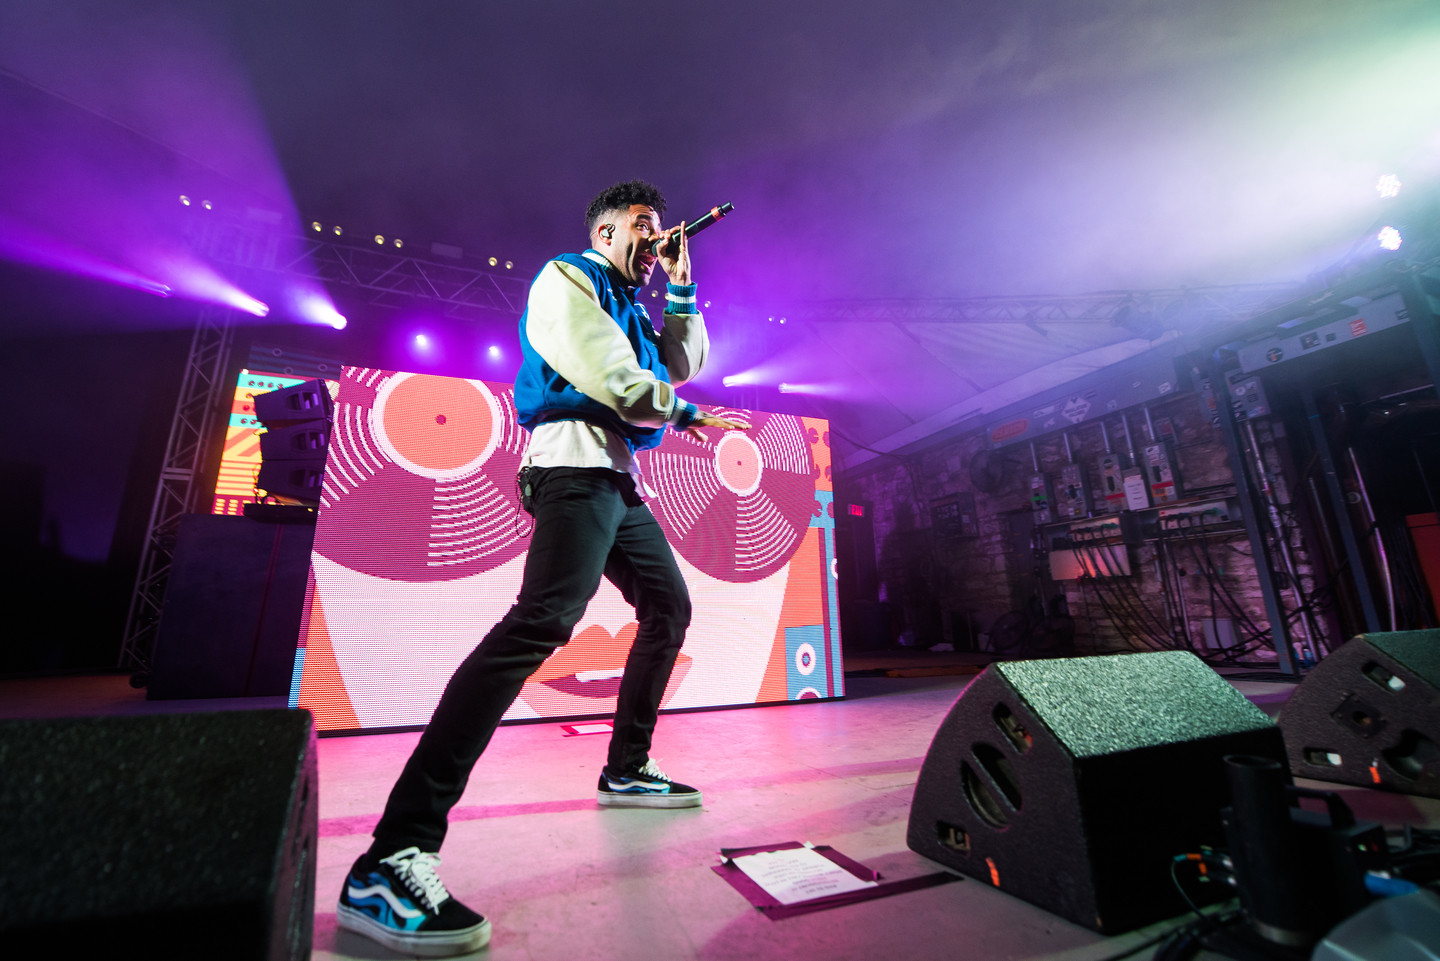 SuperDuperKyle performed at the Interactive Bash Presented by Media Temple.